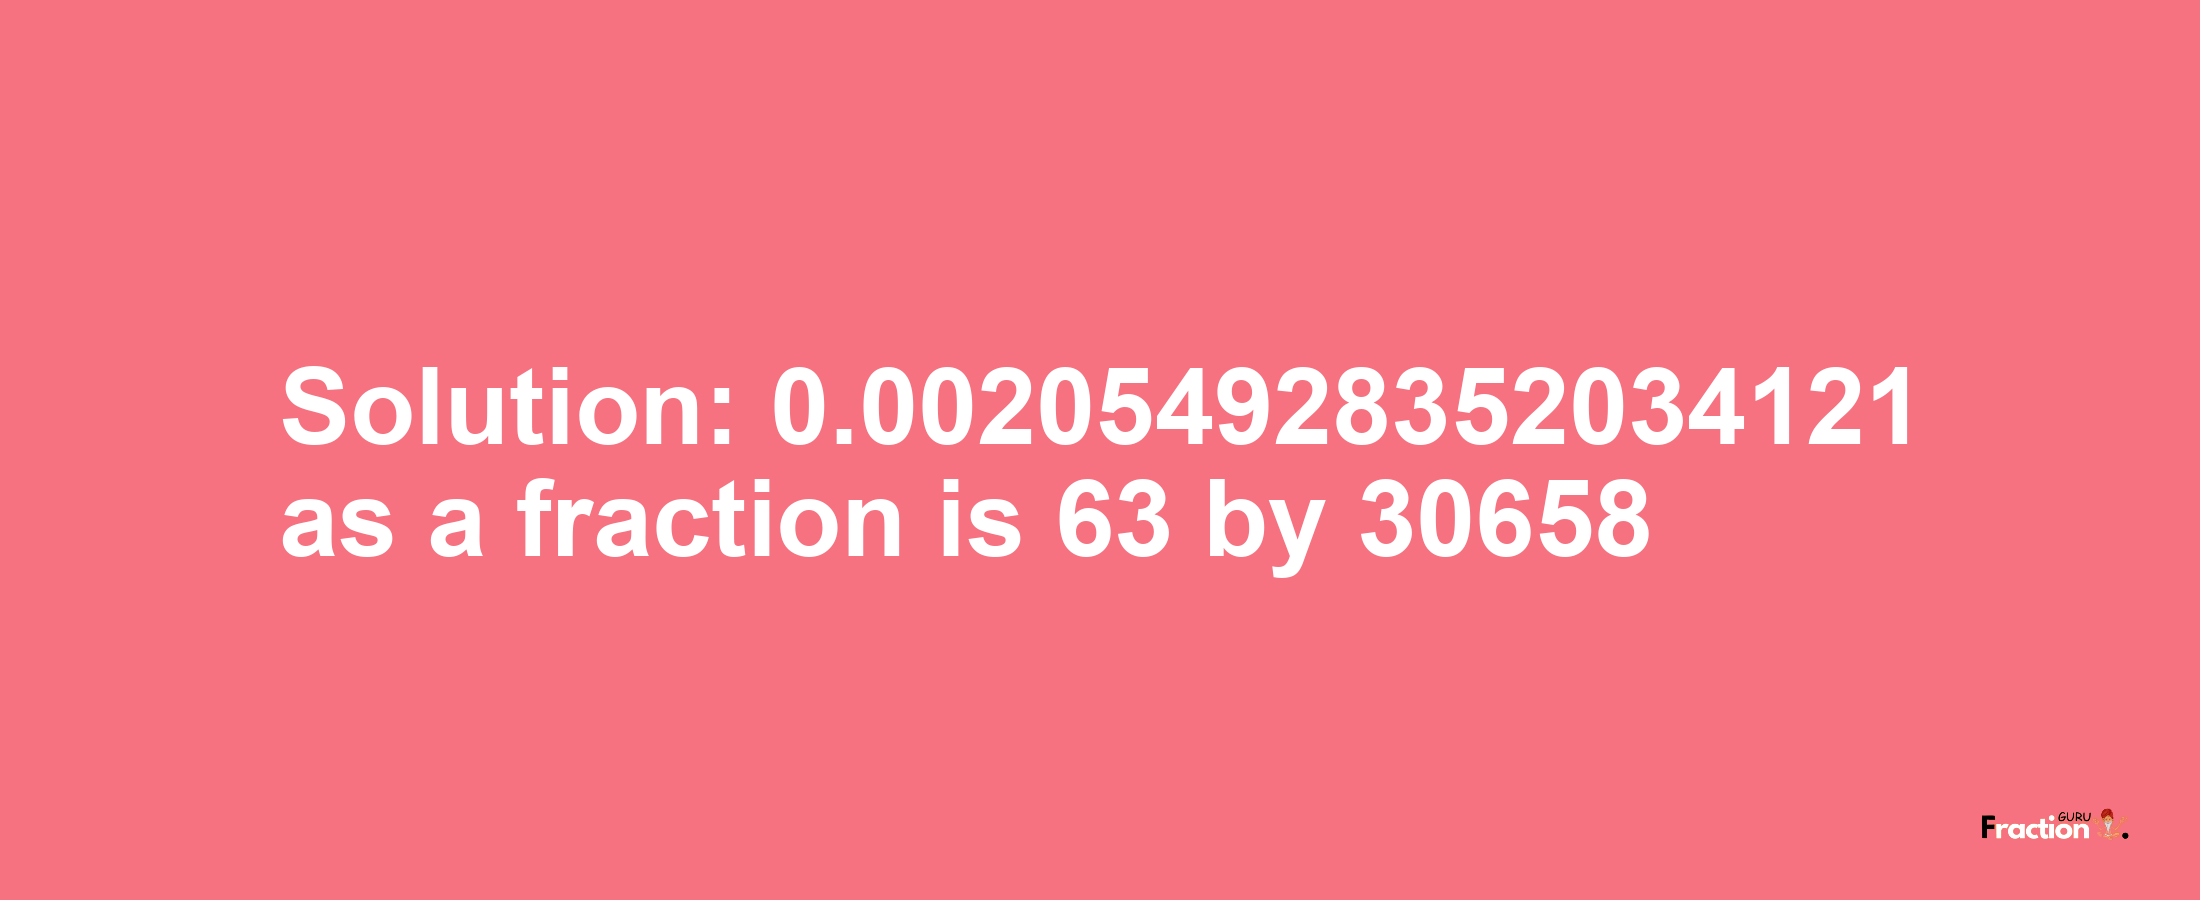 Solution:0.002054928352034121 as a fraction is 63/30658